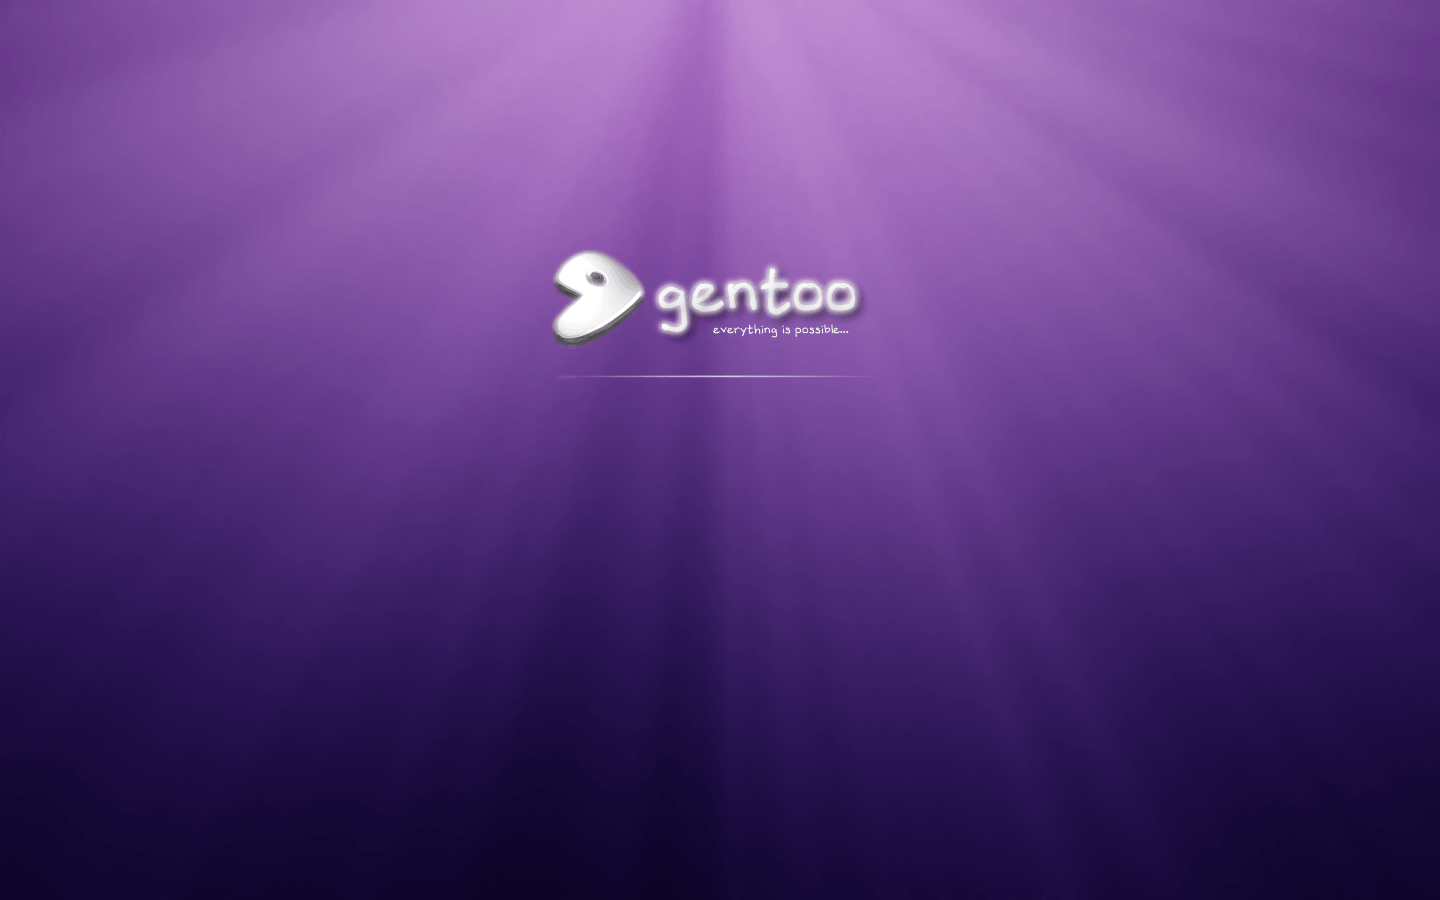 Gentoo logo Everything is possible